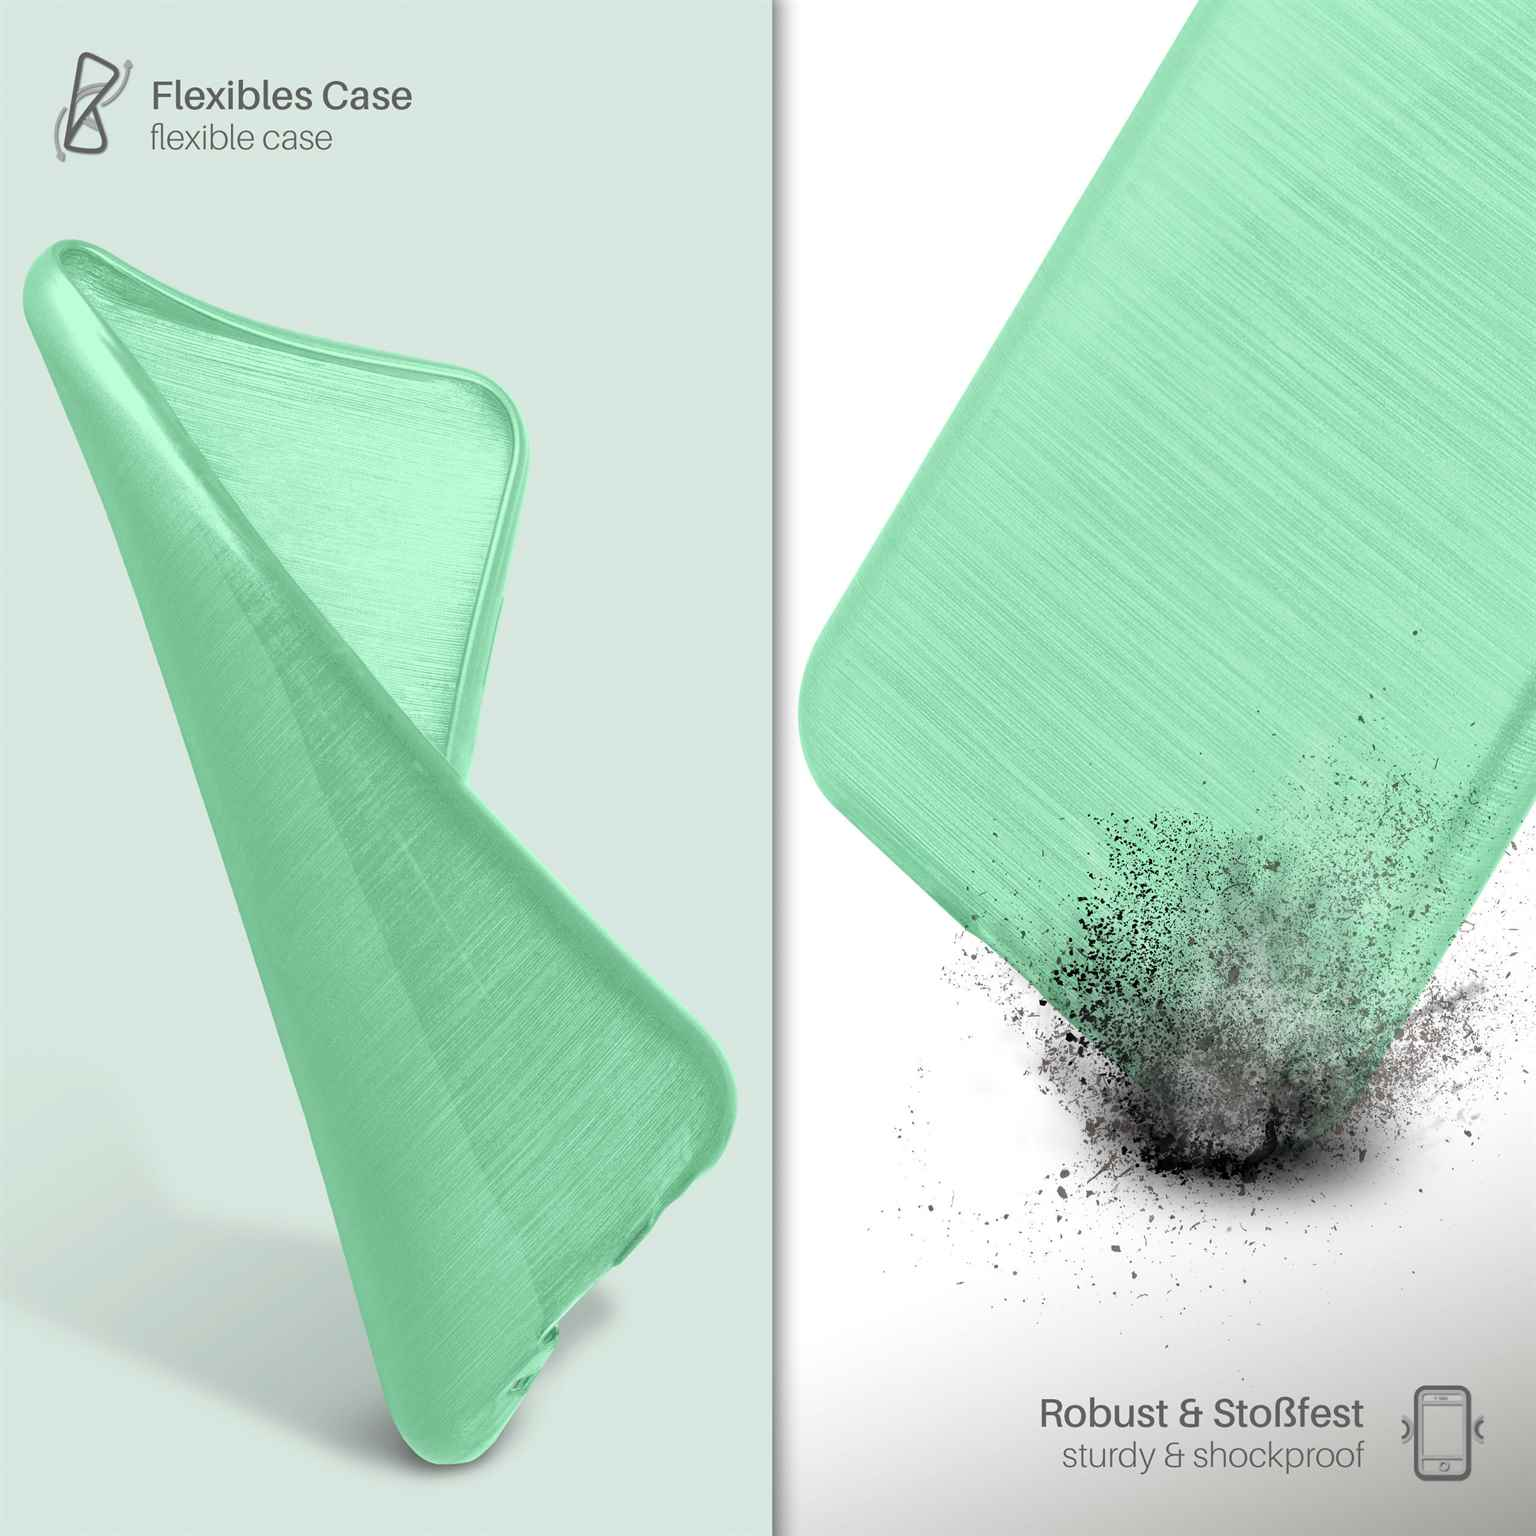 Case, Backcover, Brushed Samsung, Galaxy Mint-Green S8, MOEX